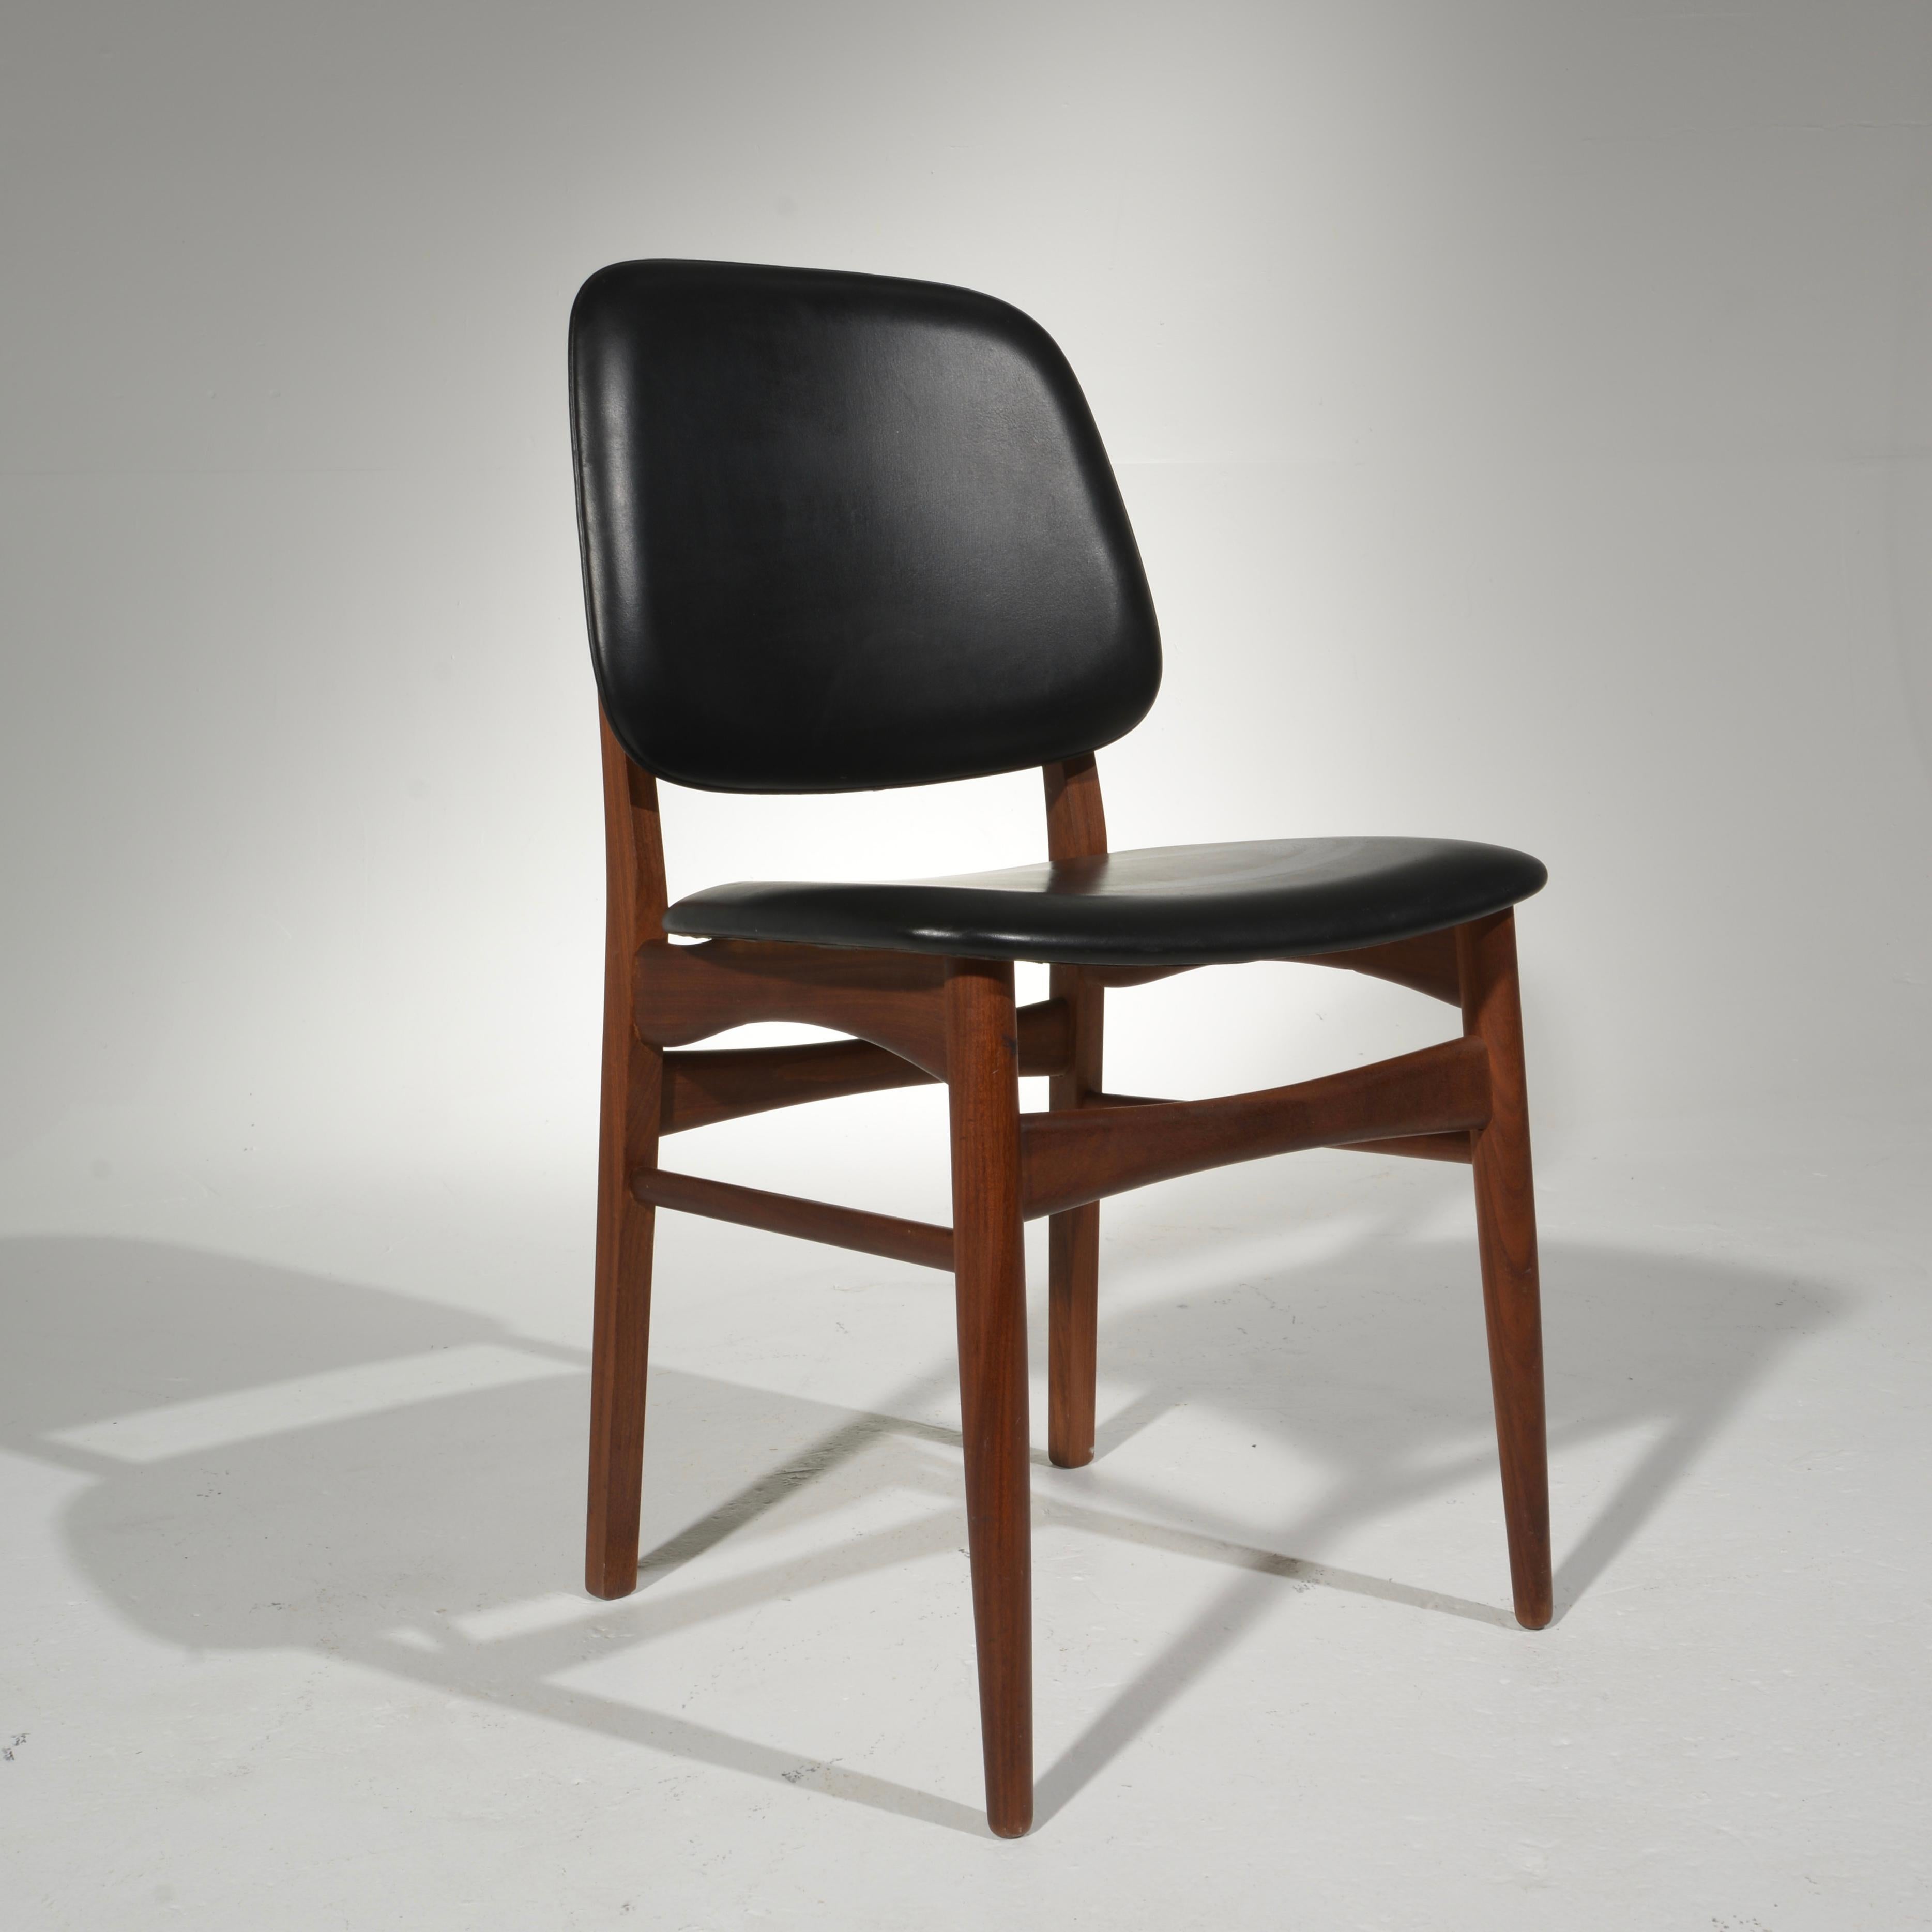 This is an excellent set of 6 Danish modern dining chairs in the style of Arne Vodder and Arne Hovmand-Olsen. All 6 are in good and ready to use condition. Made from solid walnut.